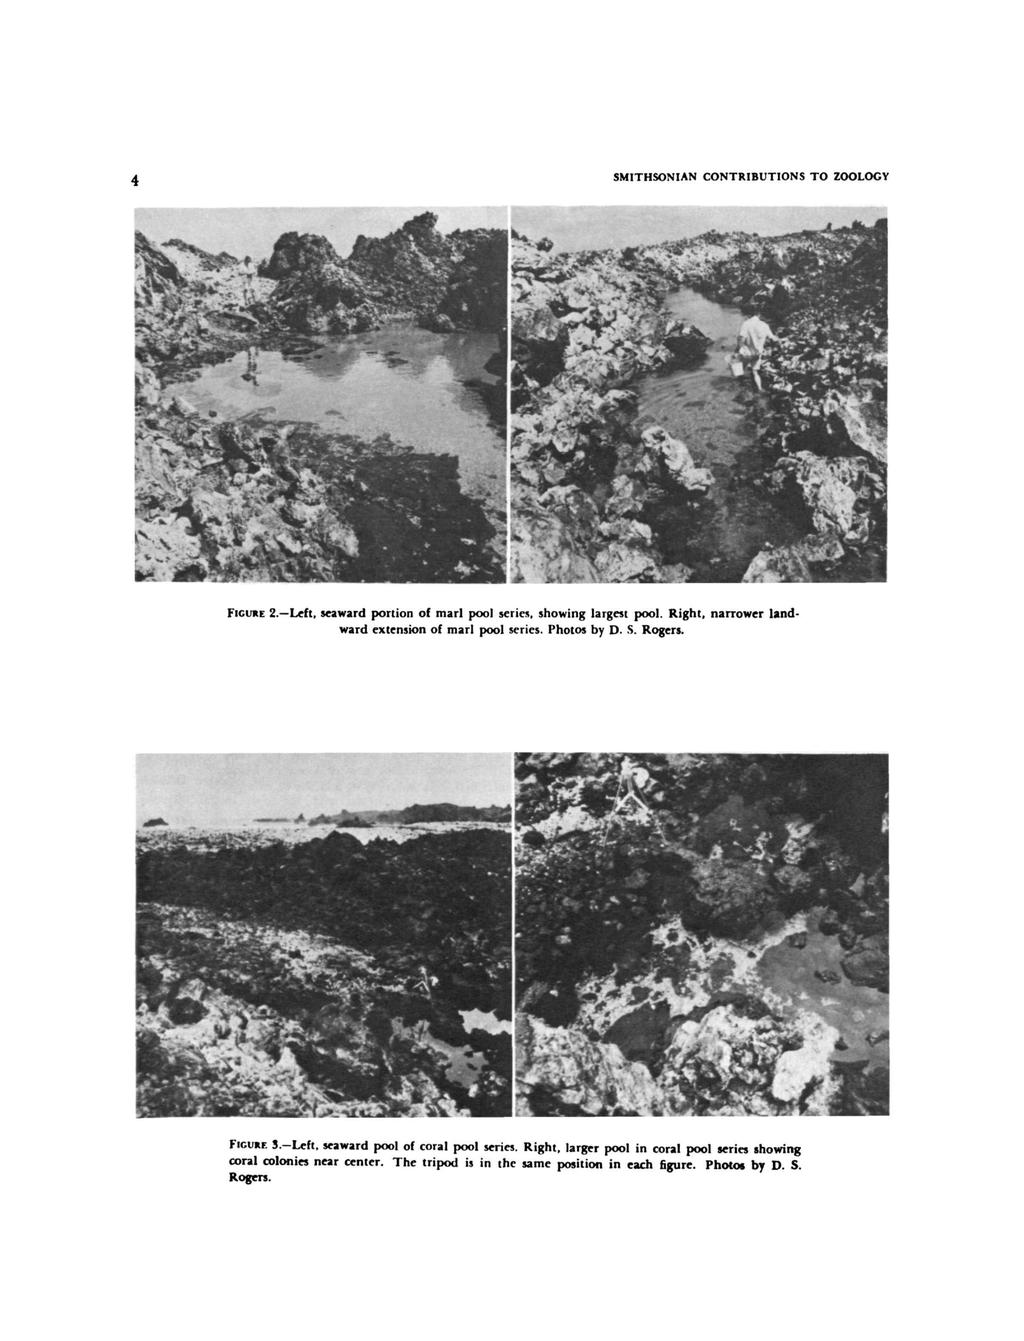 SMITHSONIAN CONTRIBUTIONS TO ZOOLOGY FIGURE 2. Left, seaward portion of marl pool series, showing largest pool. Right, narrower landward extension of marl pool series. Photos by D. S. Rogers.